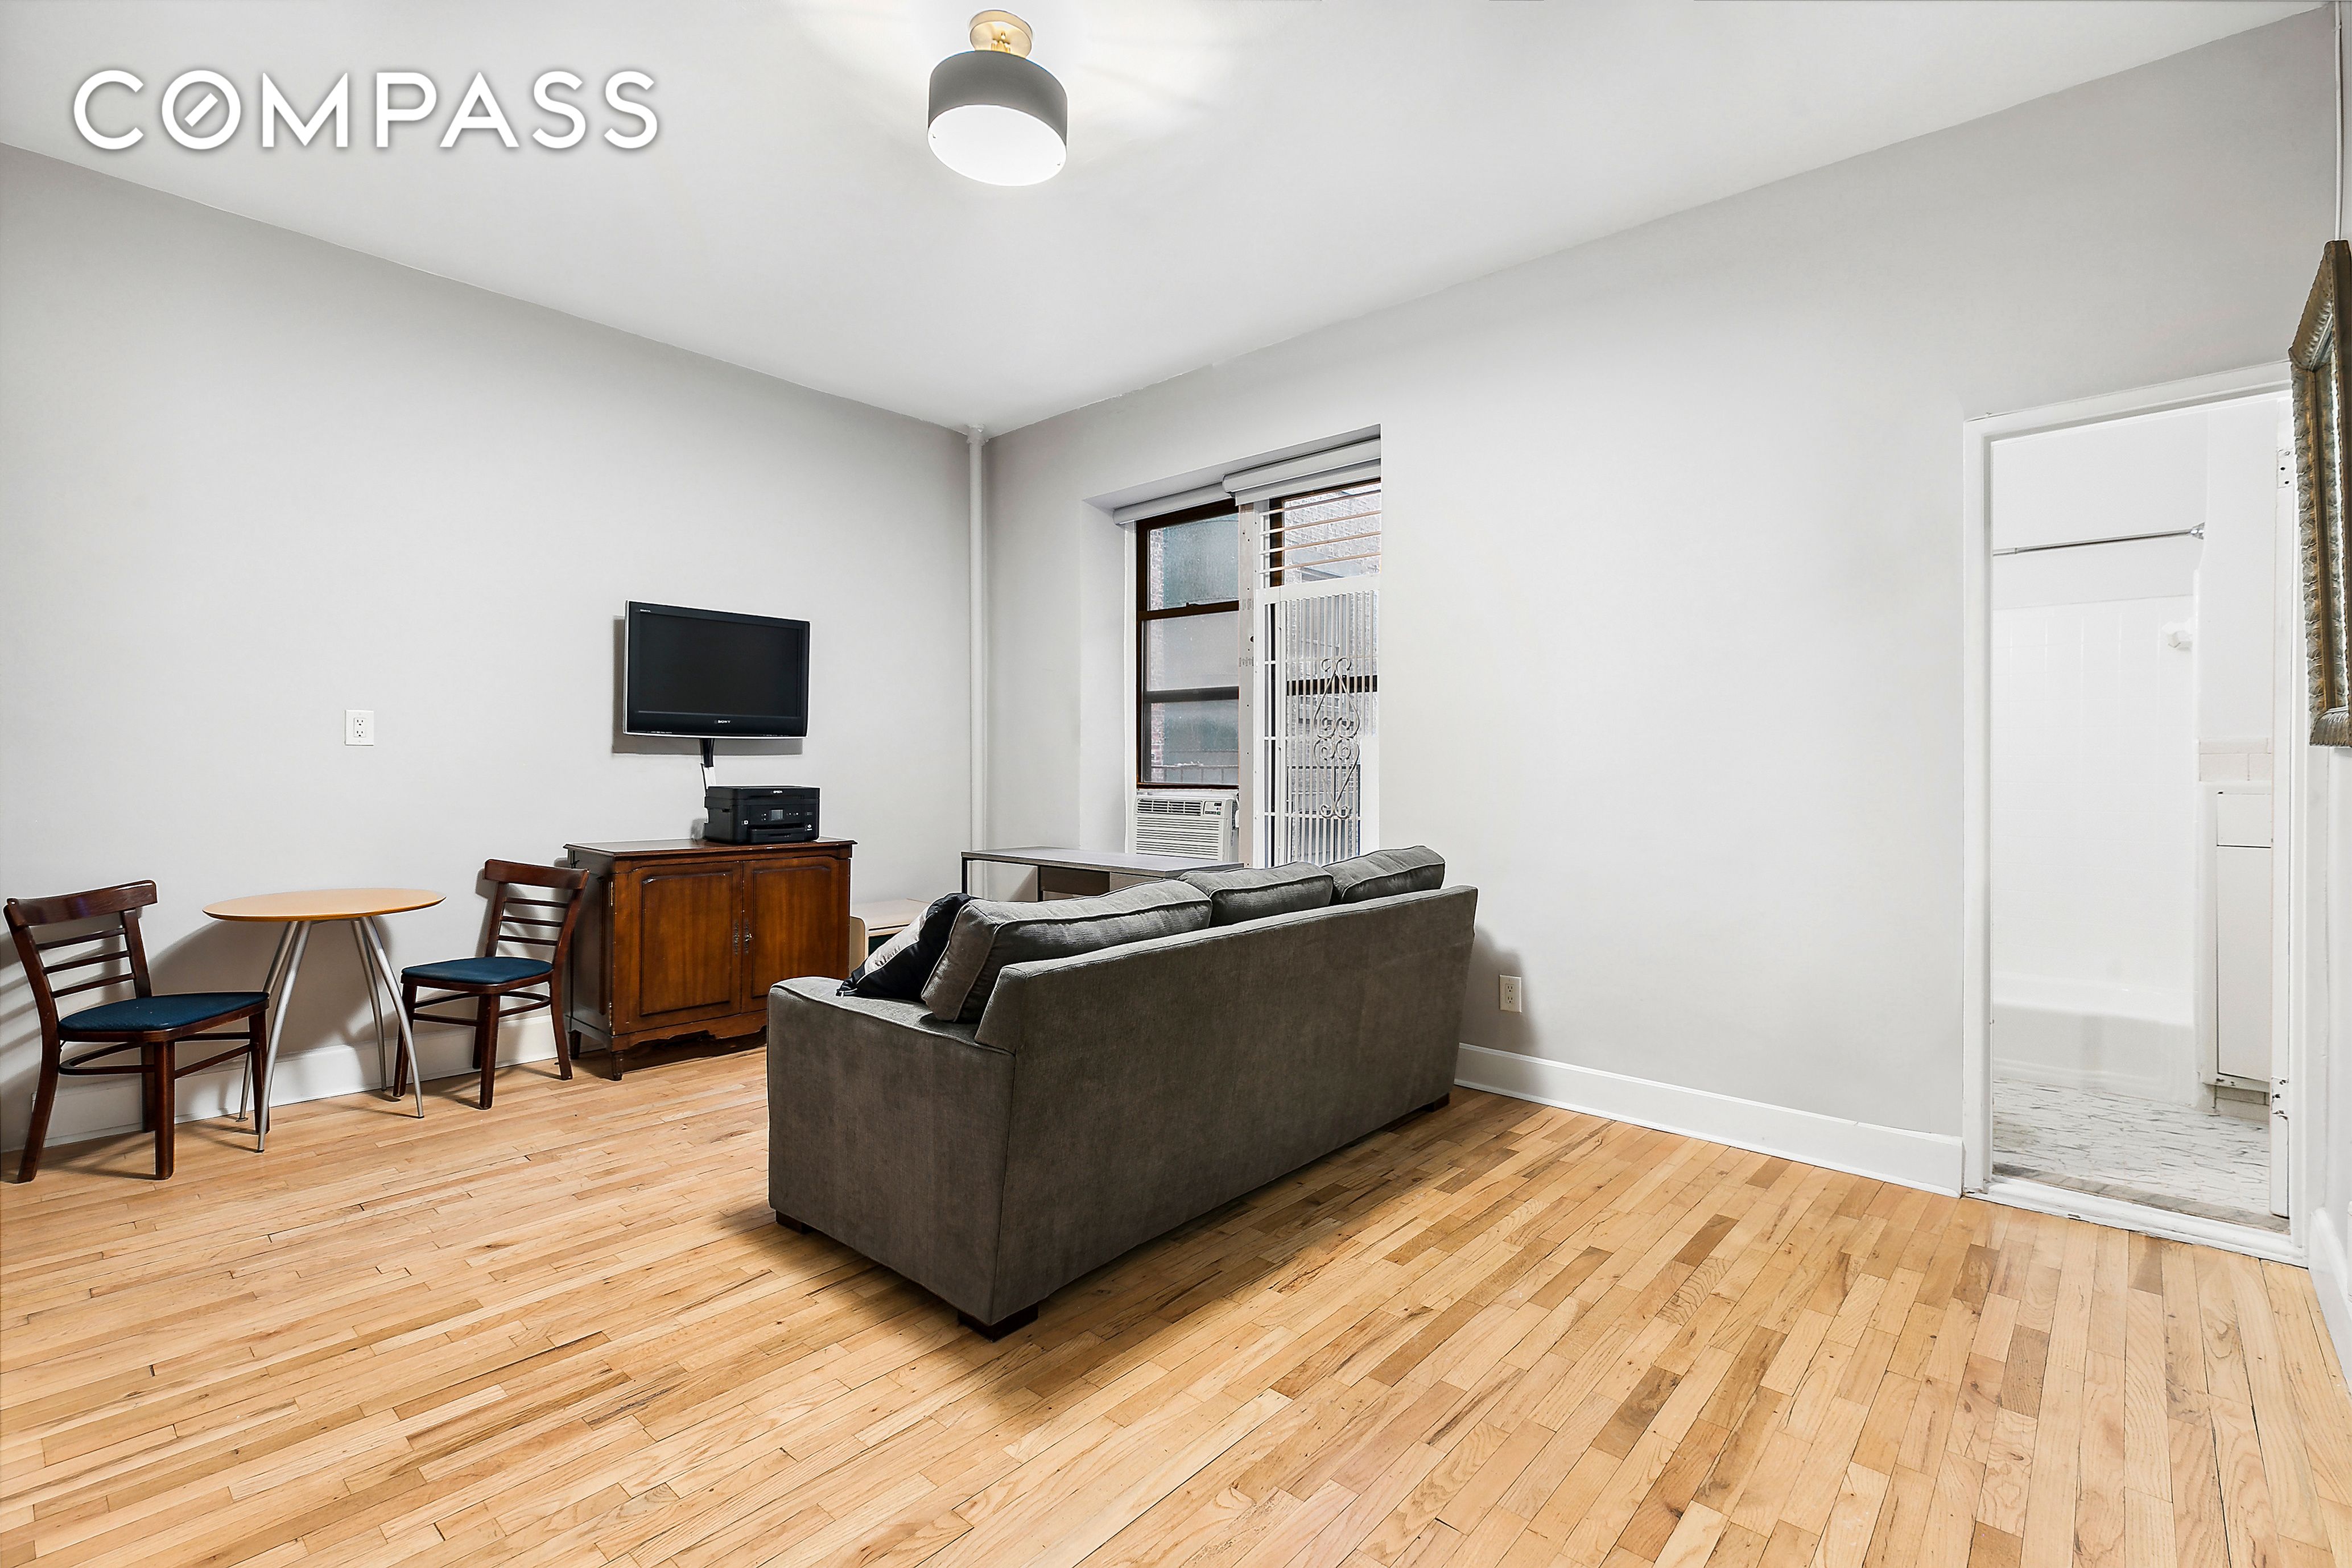 102 West 80th Street 54, Upper West Side, Upper West Side, NYC - 1 Bathrooms  
2 Rooms - 